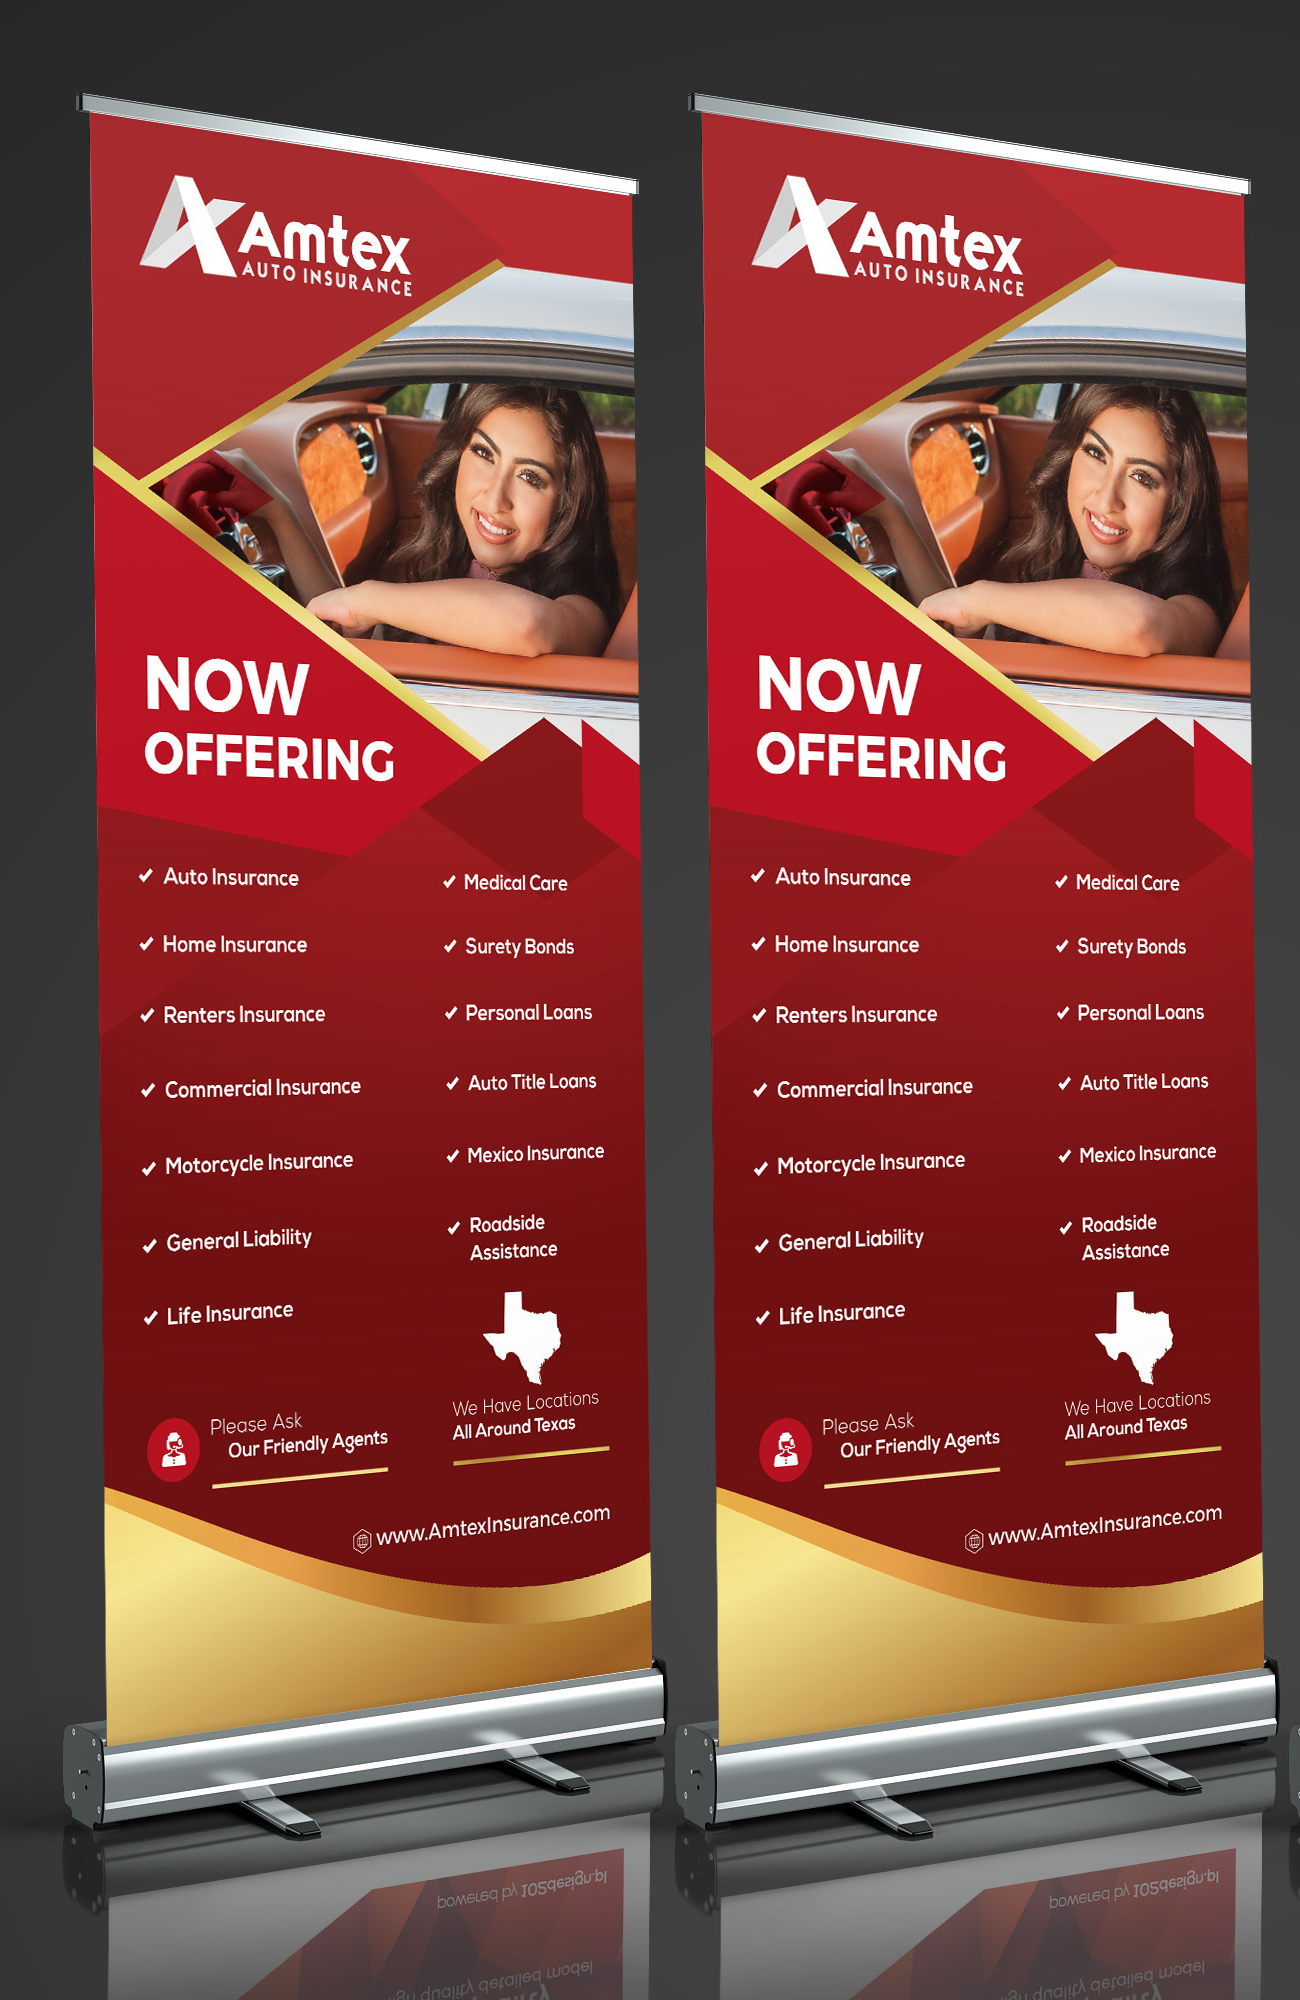 ROLL UP BANNERS HOUSTON